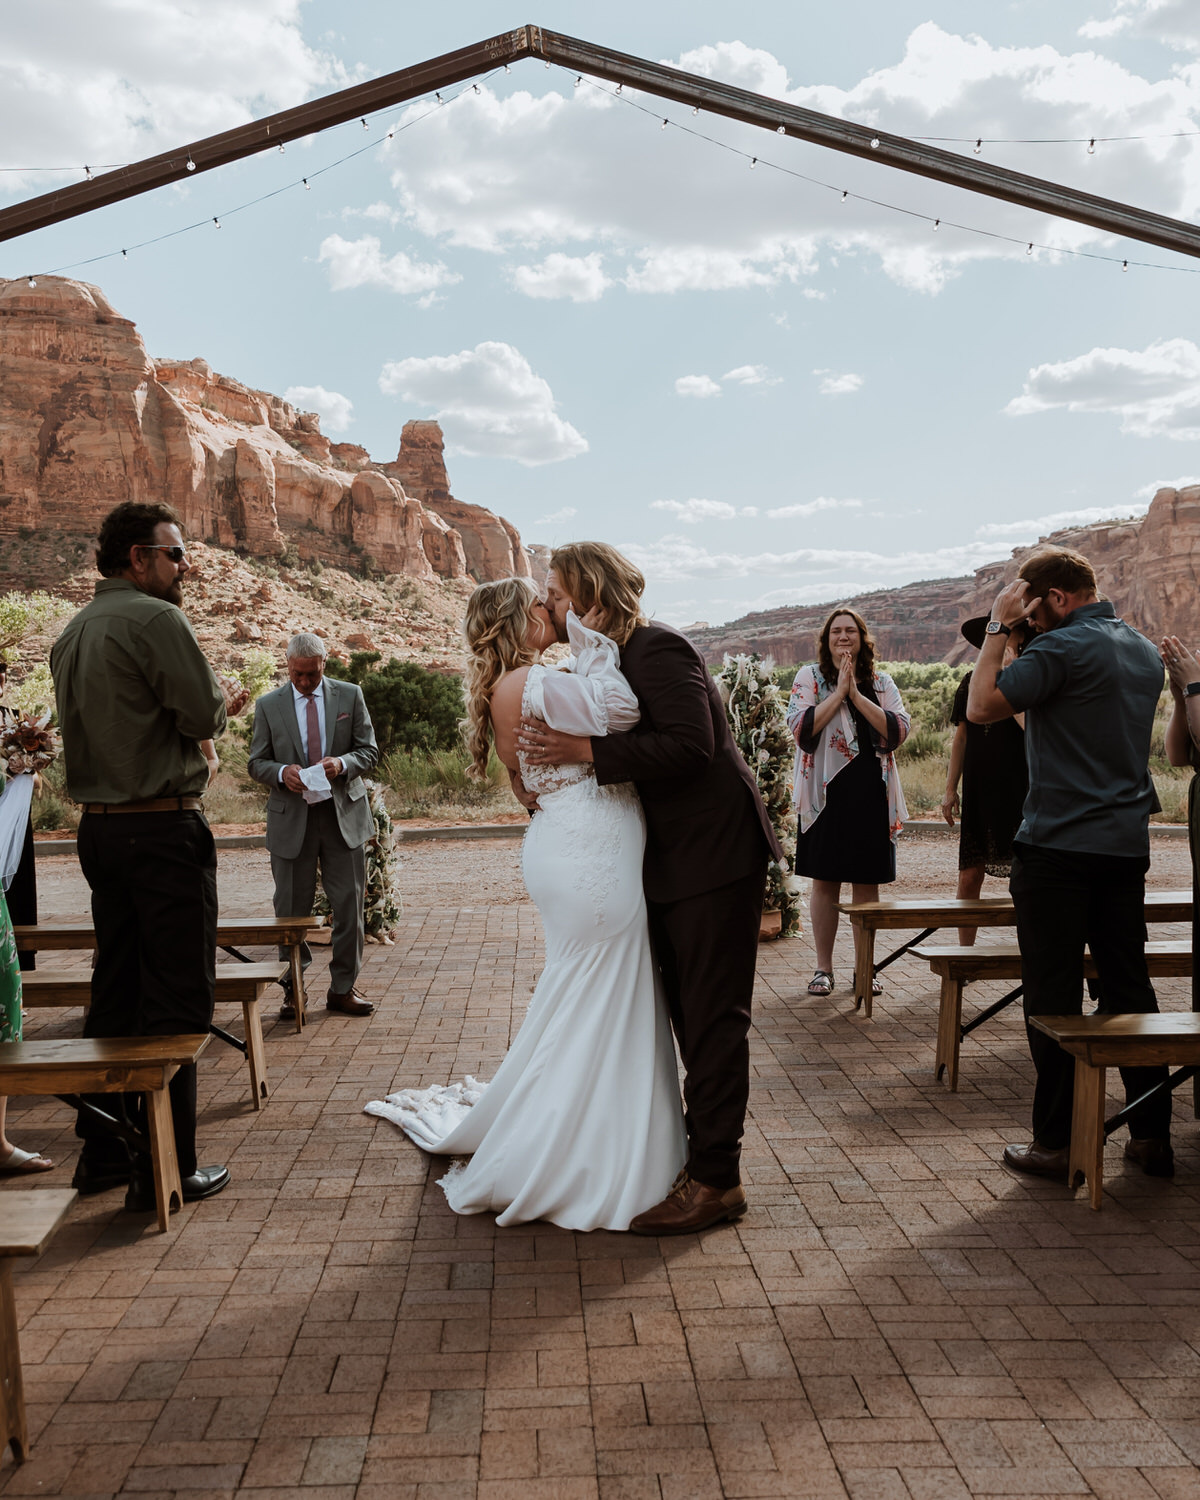 Bride and Groom having their first kiss at the red earth venue in moab utah